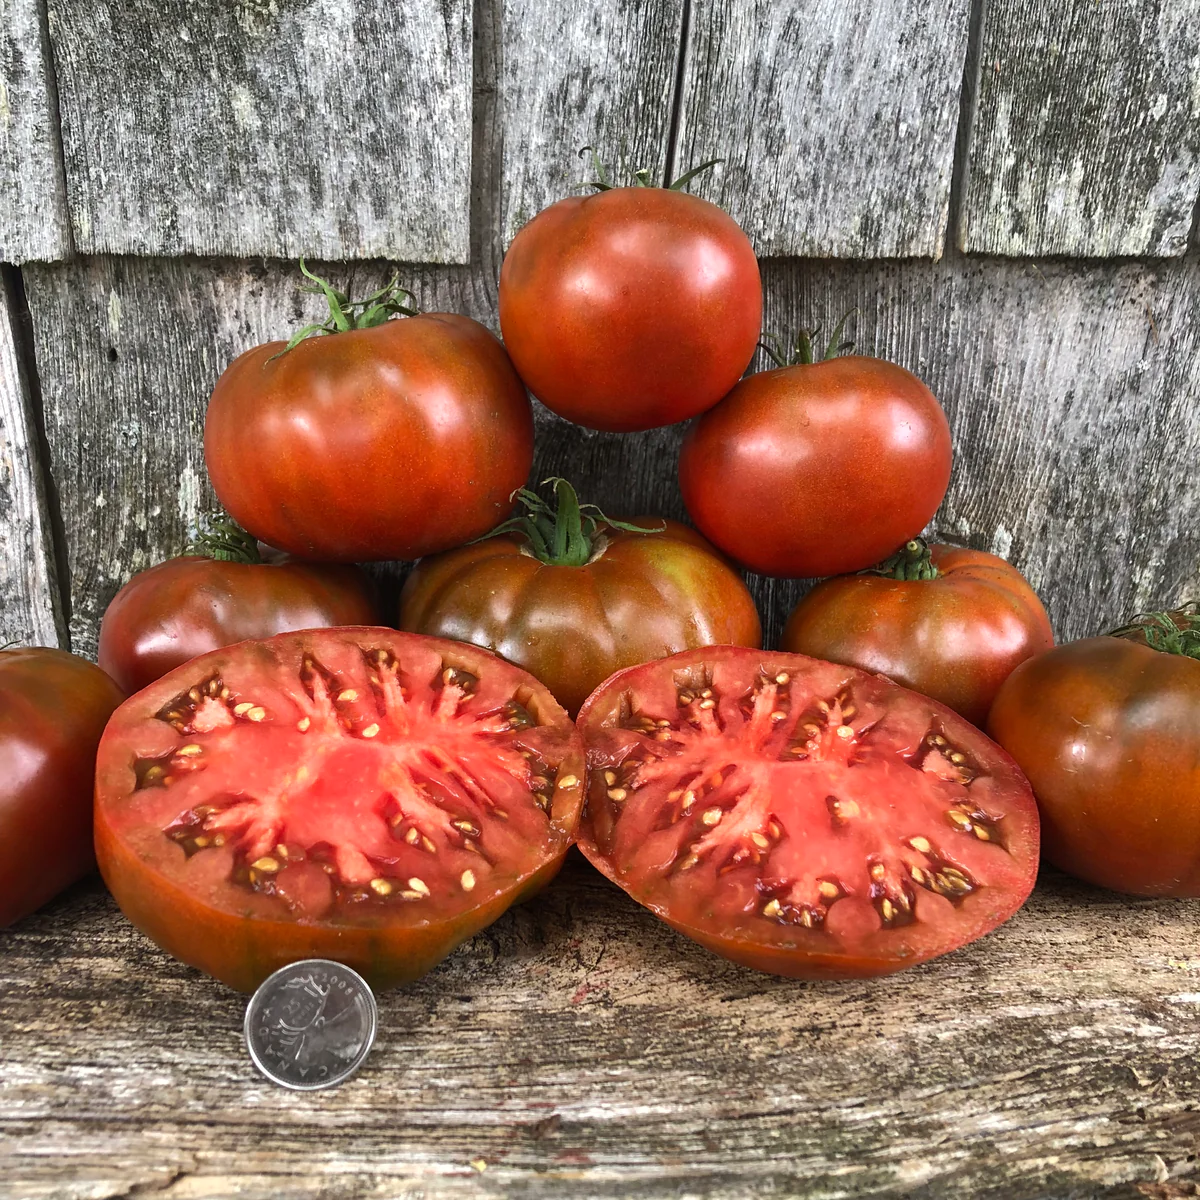 Open Pollinated Tomato Seeds: Qualities, Advantages, and Surveys